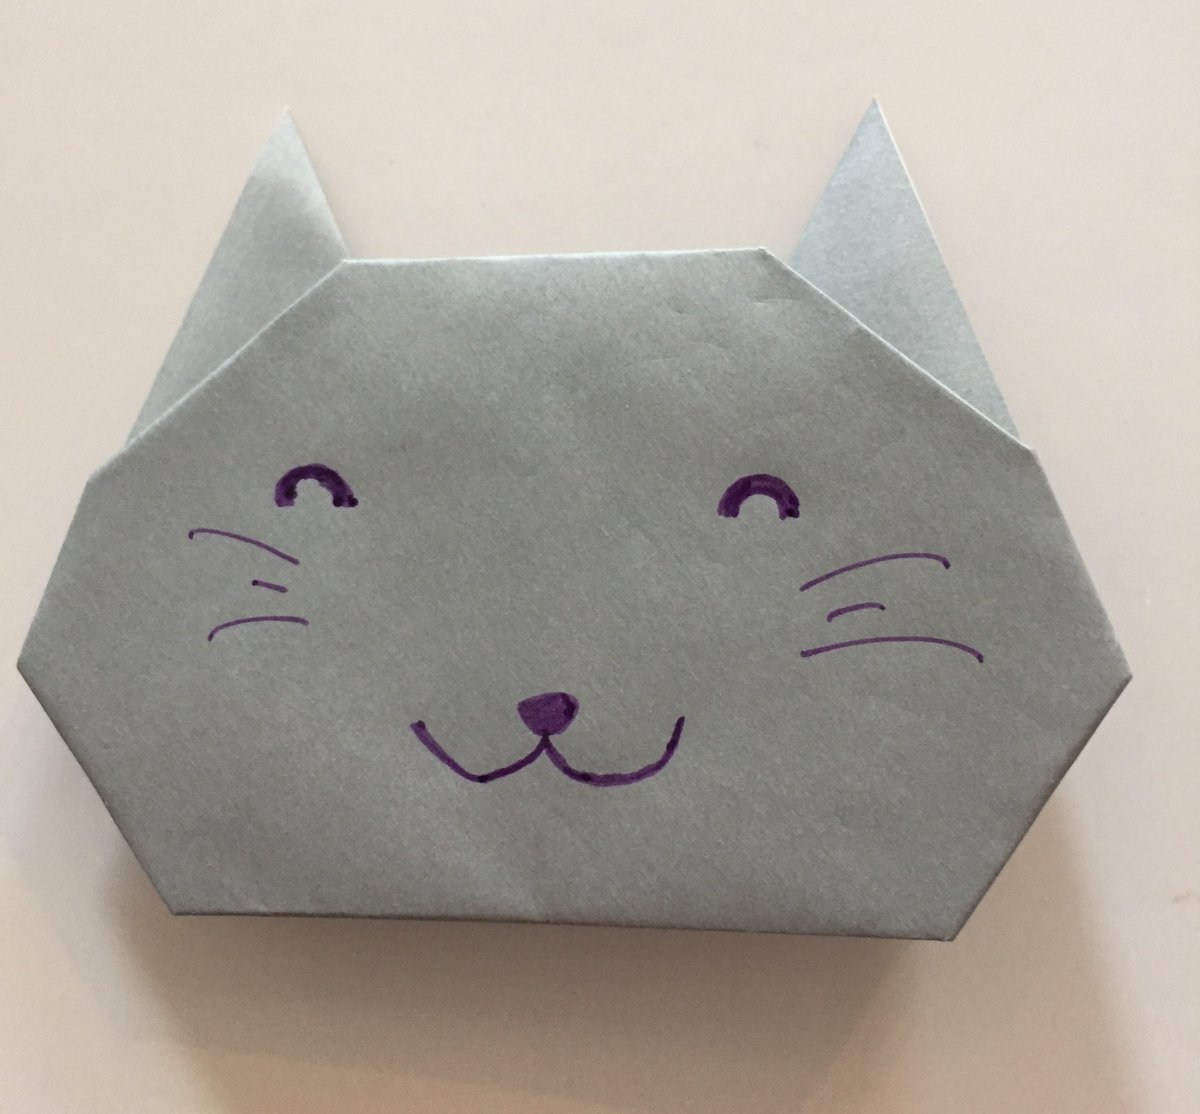 6. I used 15 cm x 15 cm  #origami paper for this Easy Origami Cat. If you want to attach this cat to a card or drawing, you may want to glue or tape the back. But the bottom 2 folds can also act as a stand.